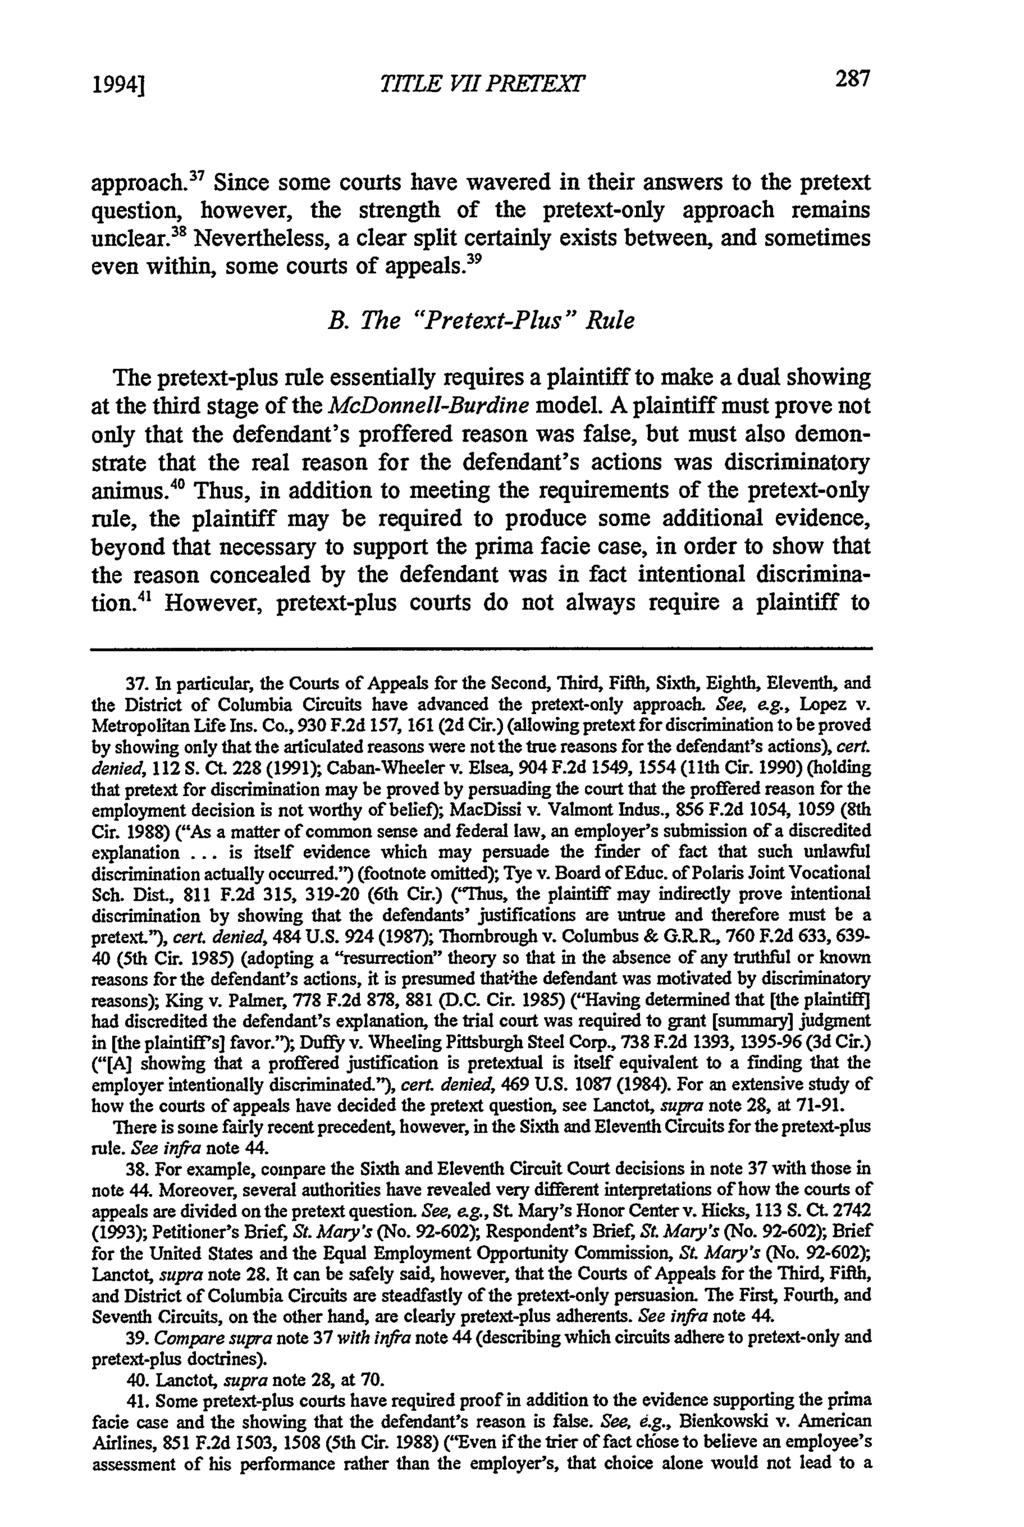 19941 TITLE 7II PRETEXT approach. 37 Since some courts have wavered in their answers to the pretext question, however, the strength of the pretext-only approach remains unclear.